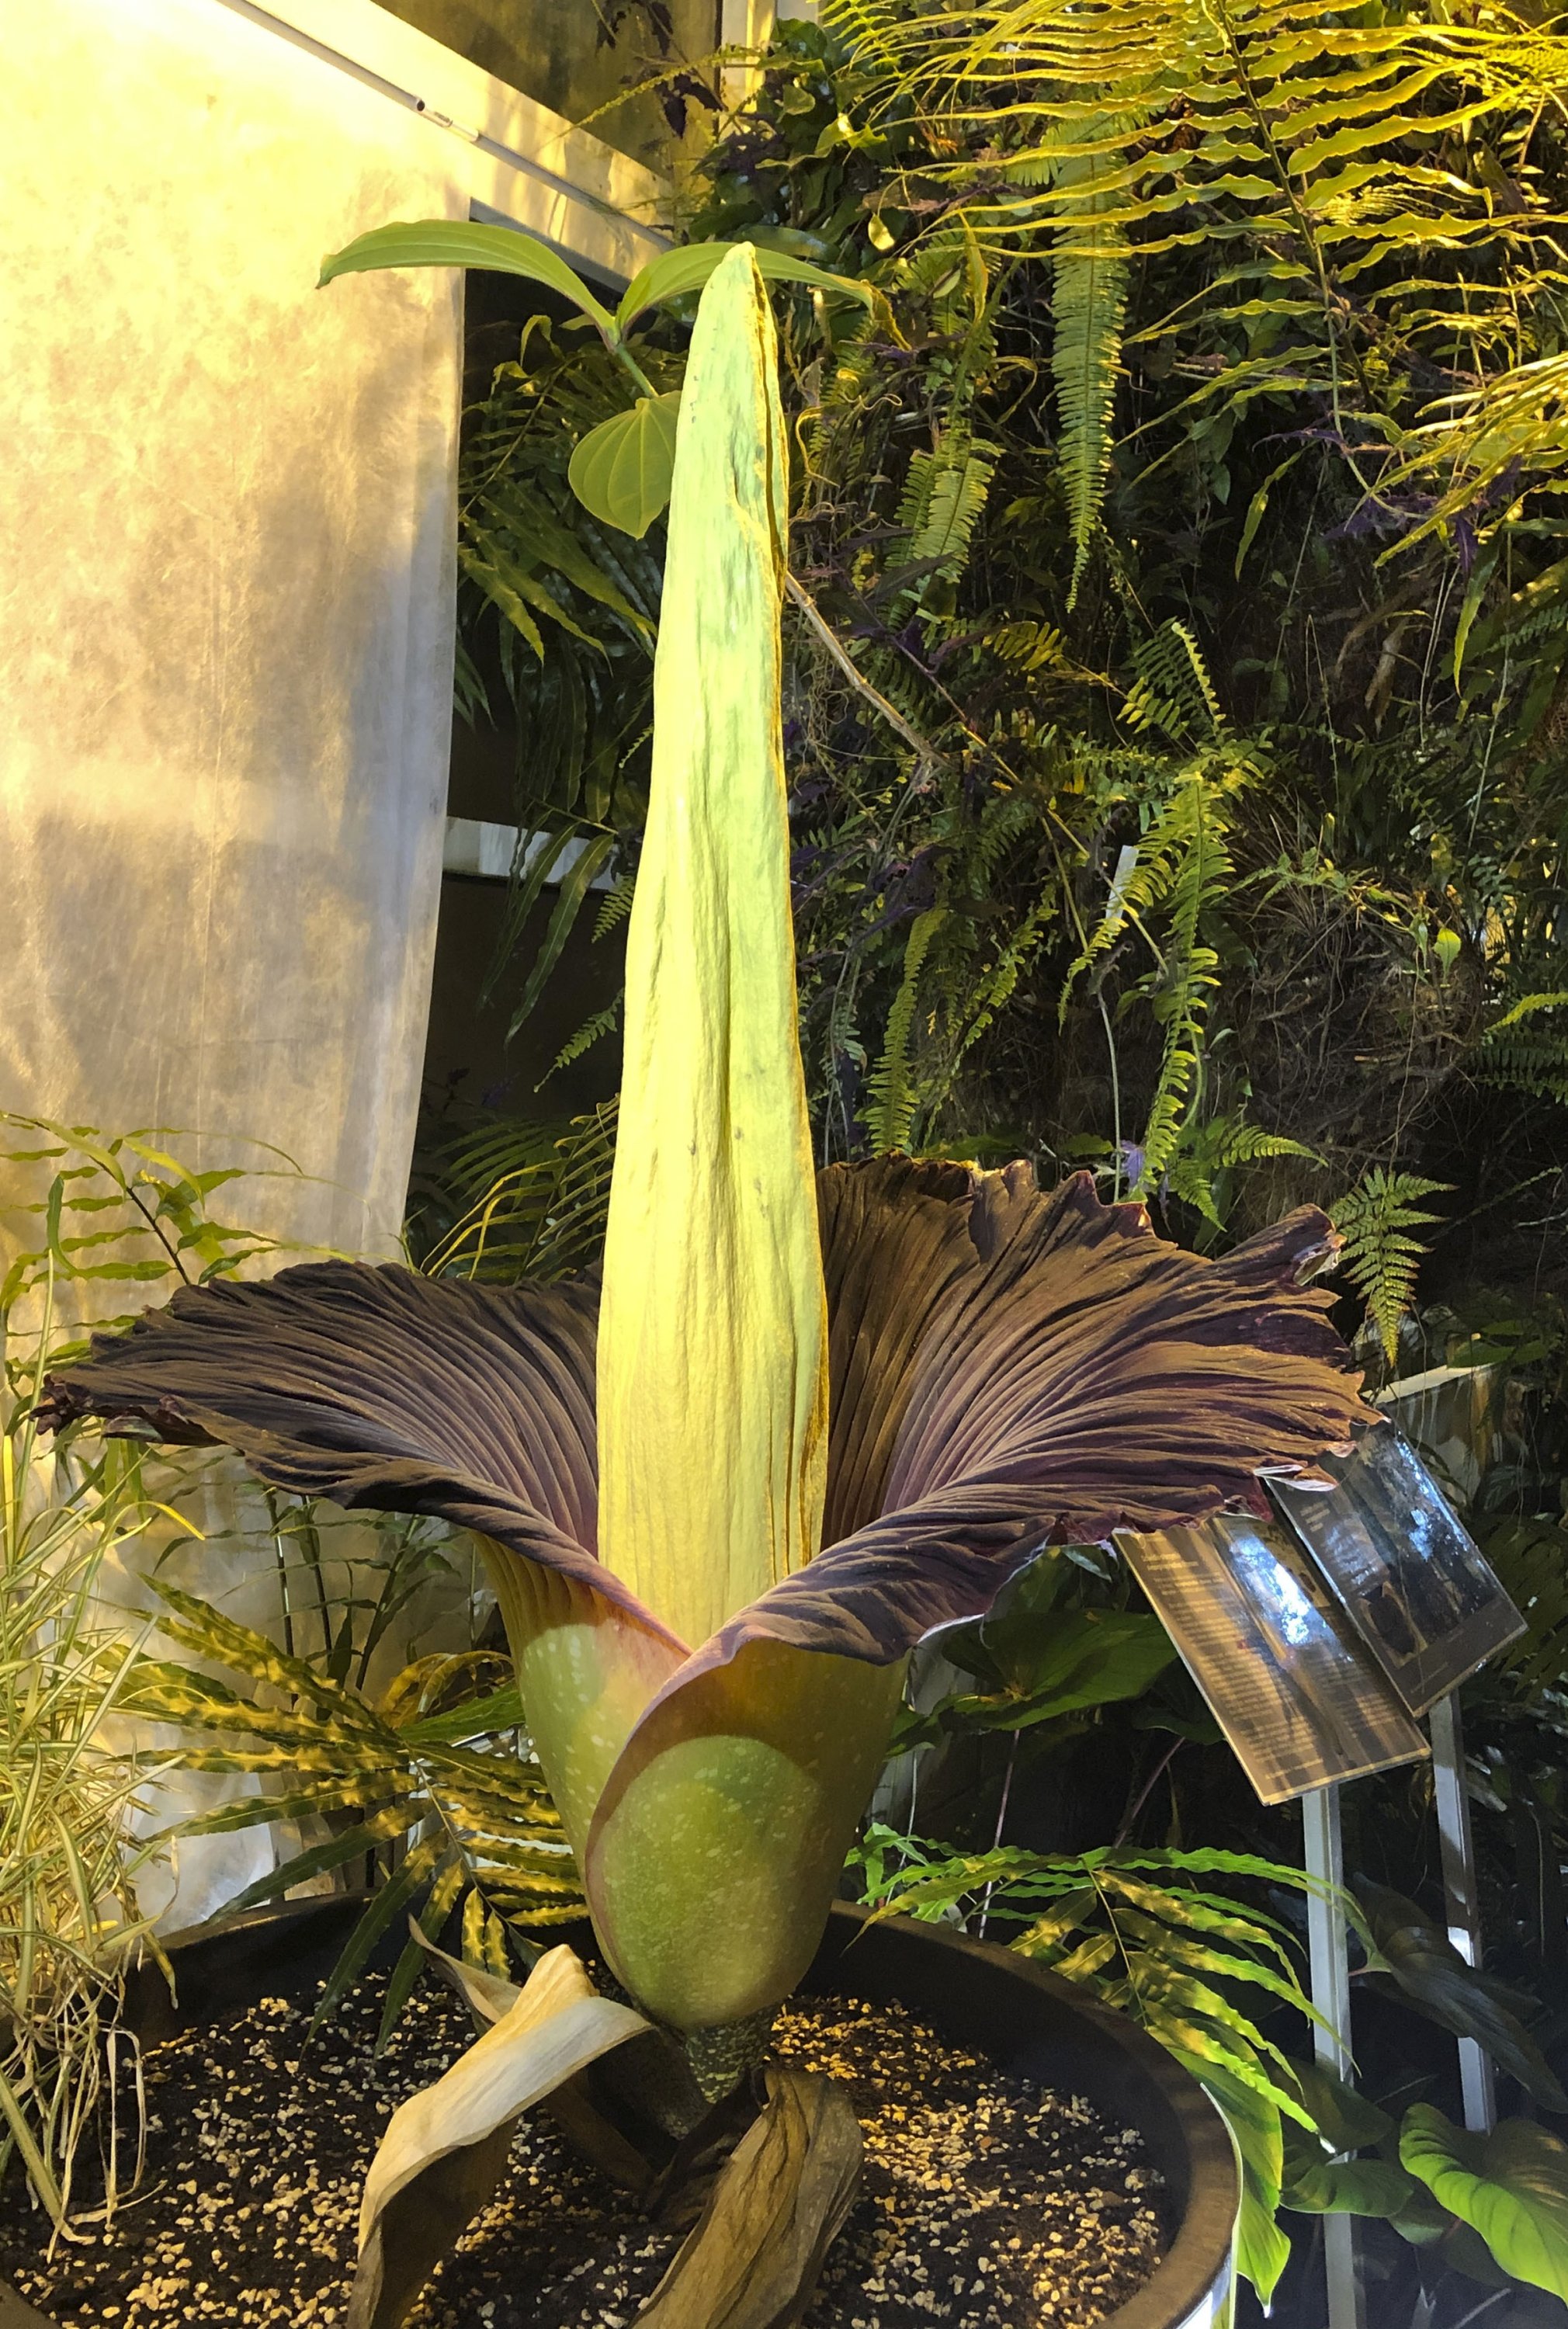 The endangered Sumatran Titan arum at the rare moment of bloom for just a few hours, at the Warsaw University Botanical Gardens, in Warsaw, Poland, June 13, 2021. (AP Photo)